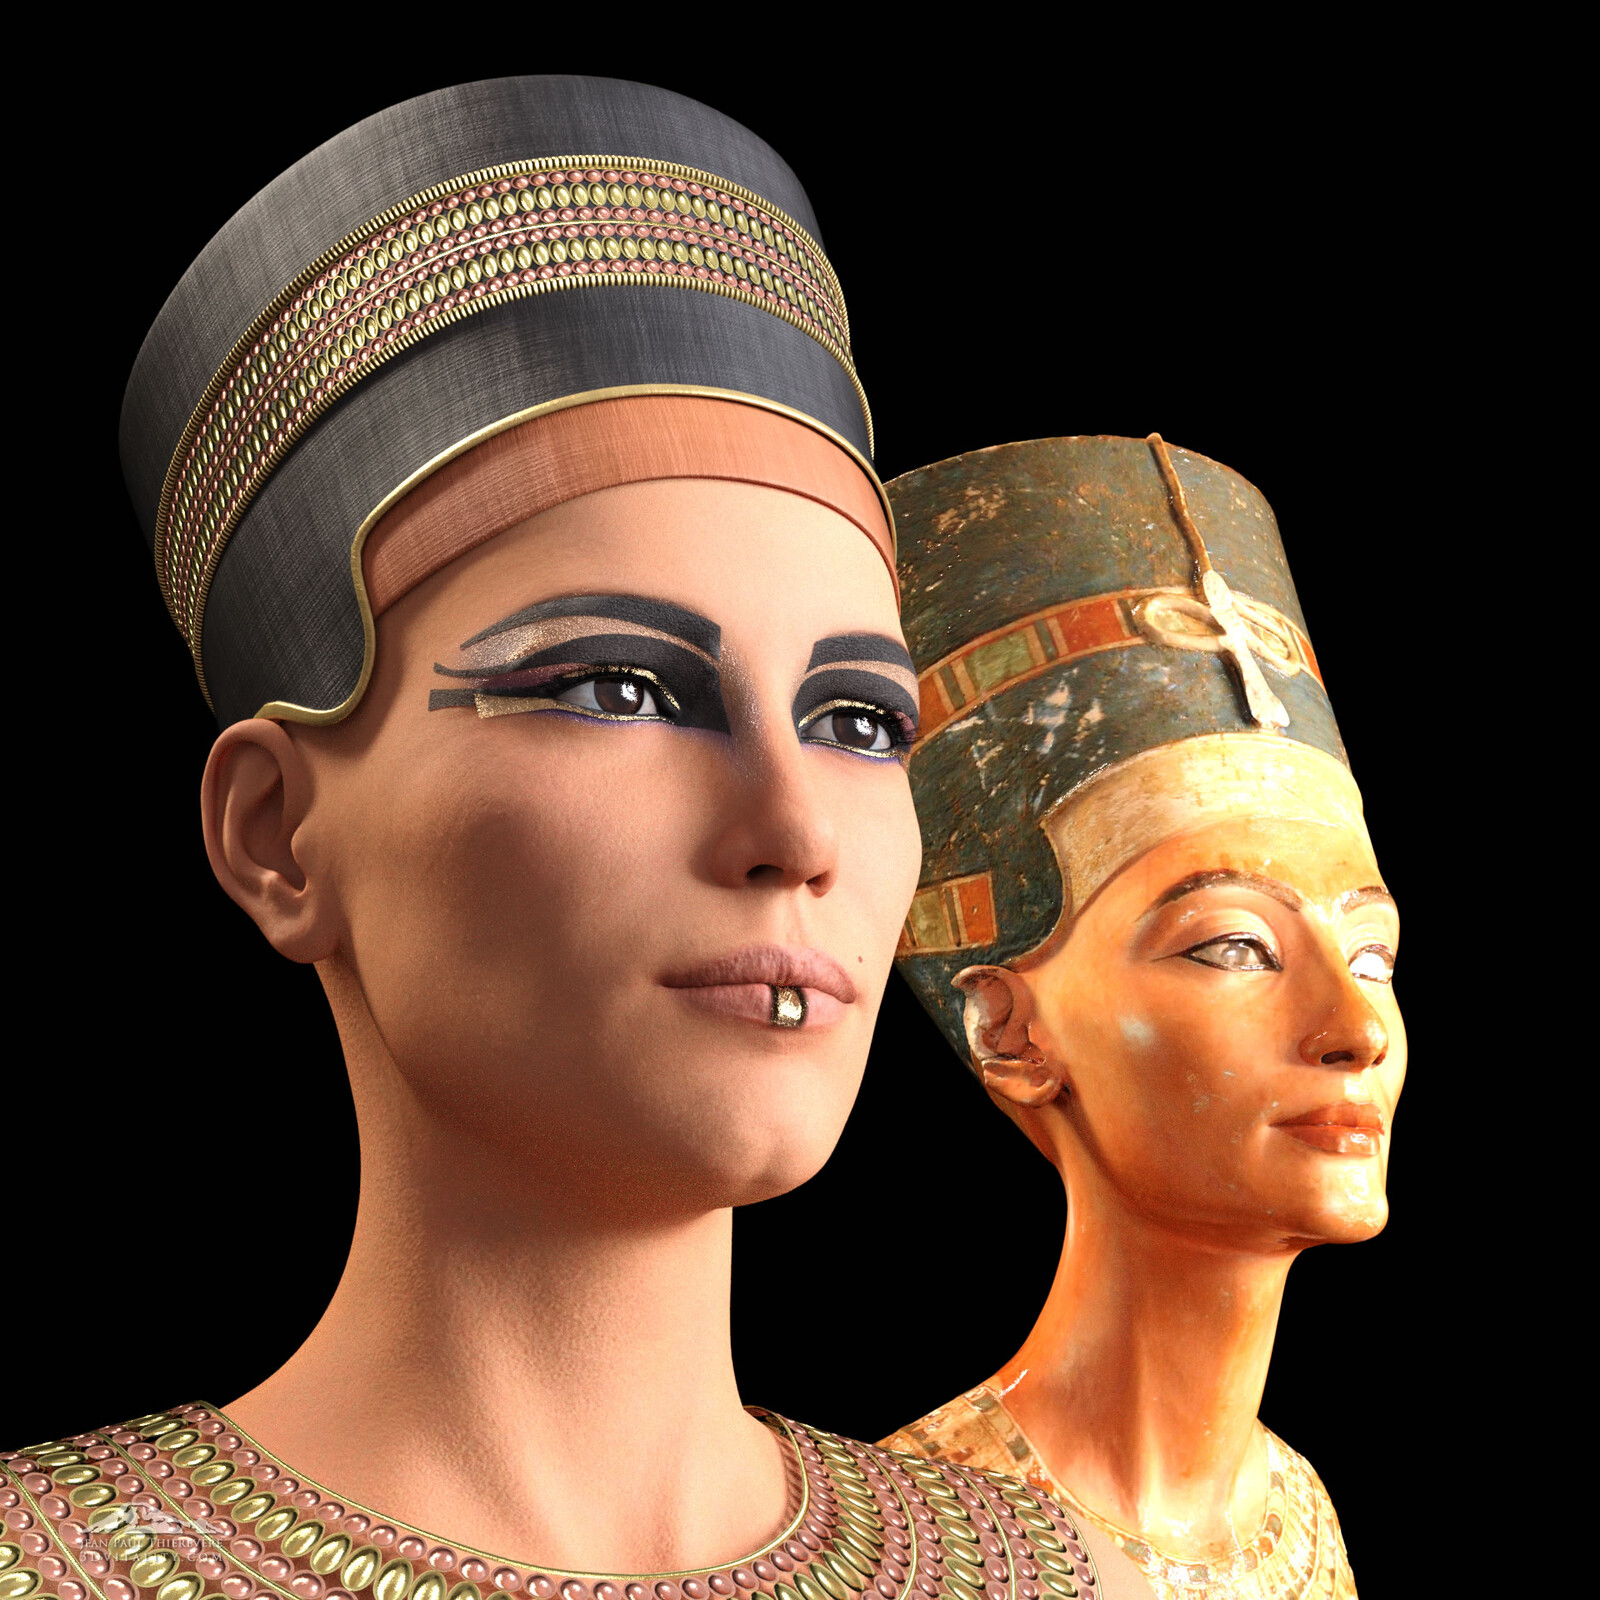 Neferet-iti and her bust, the original bust of Nofretete